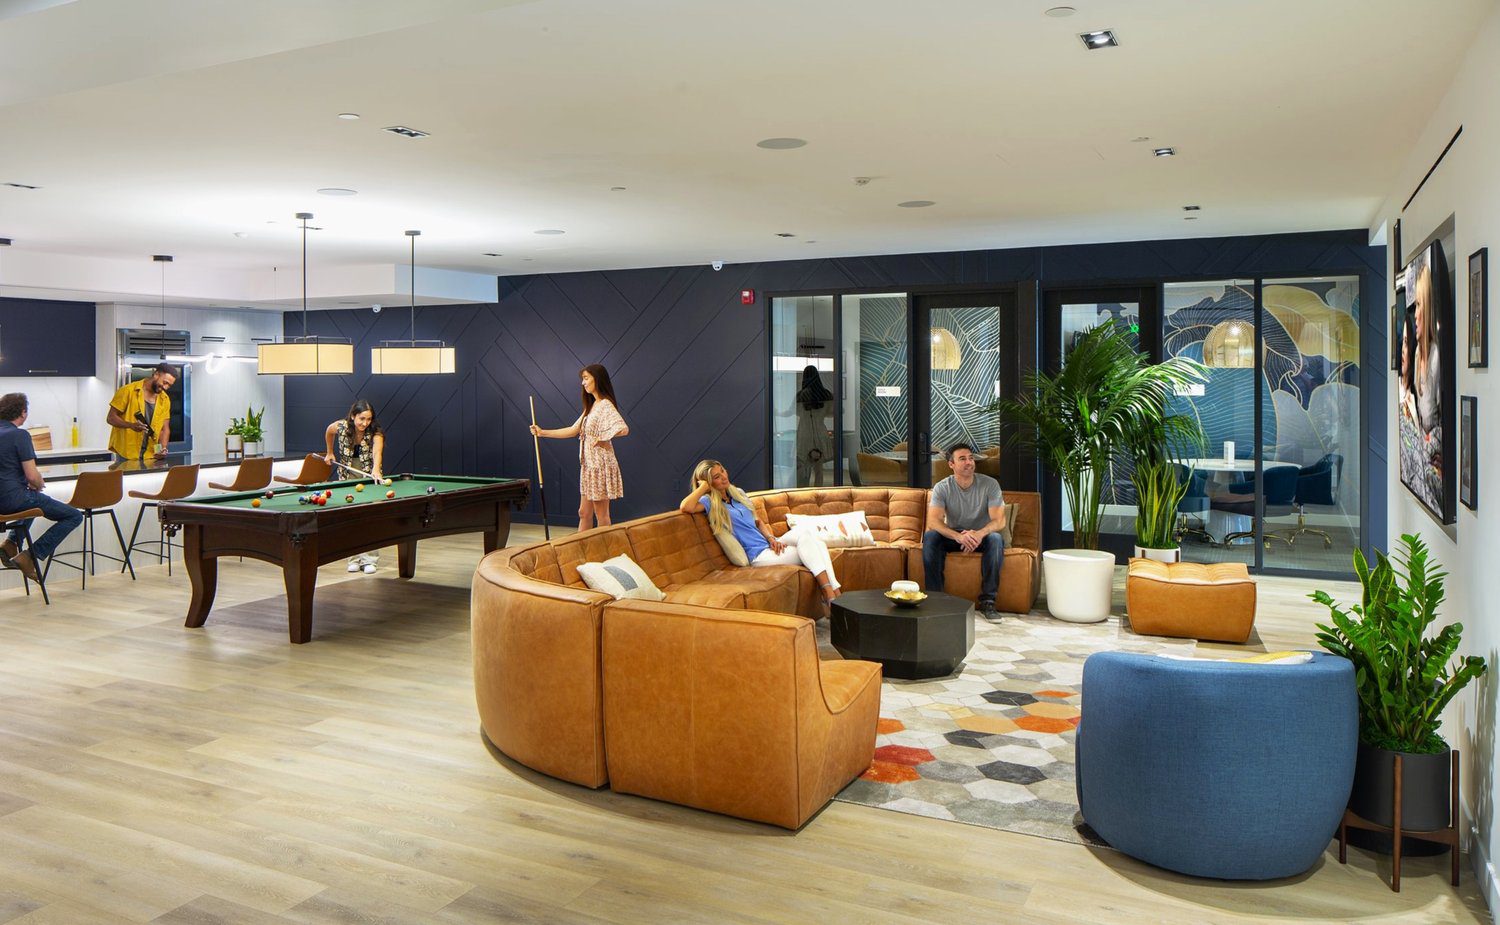 A group of people are sitting in an office with enhanced amenities like a pool table.